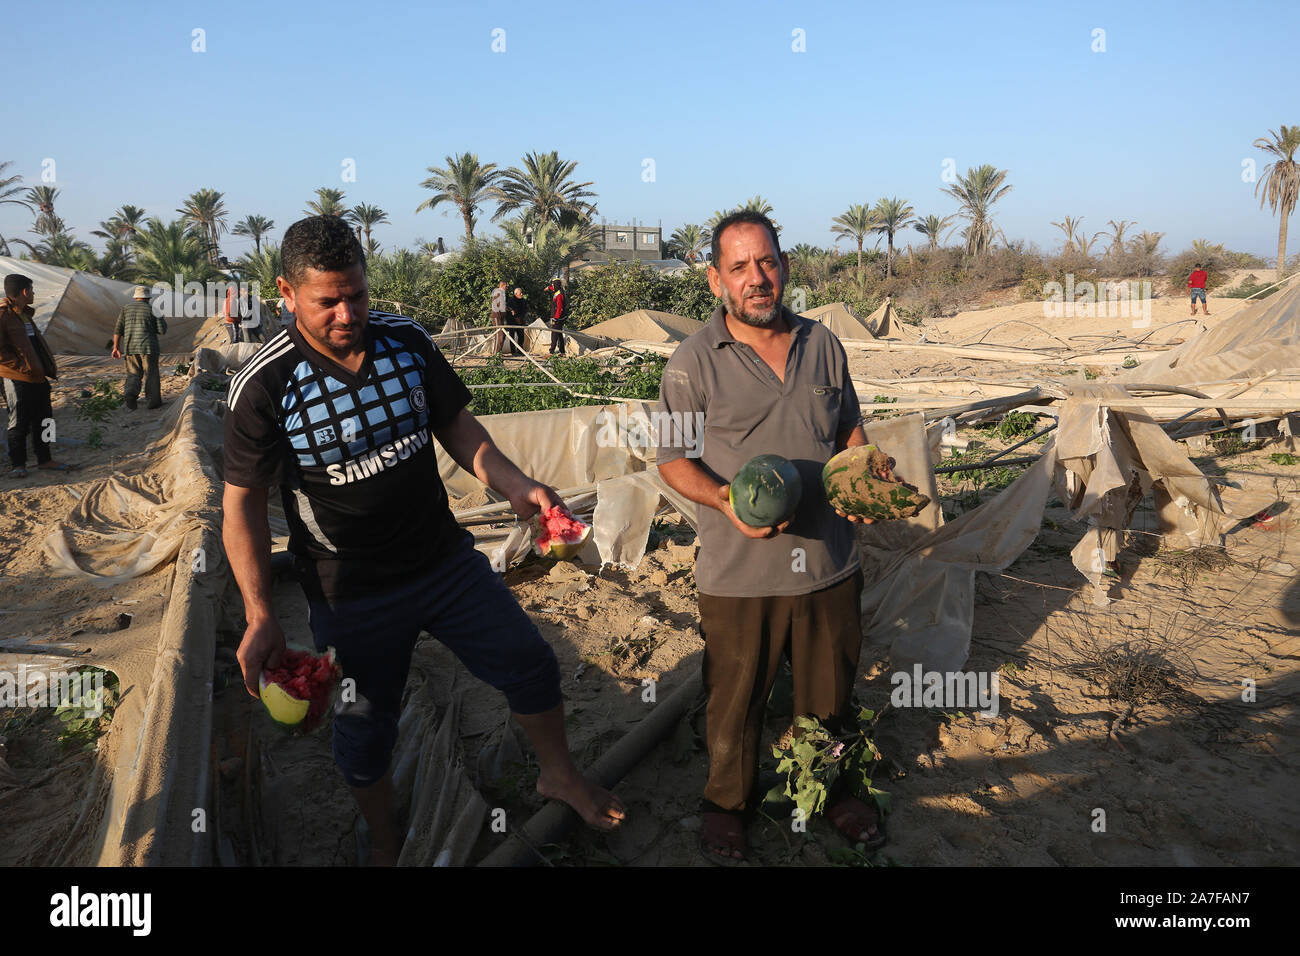 Palestinians inspect positions of Qassam Brigades that was hit by Israeli fighter jets, in Gaza Strip on Nov 2, 2019. Photo by Abed Rahim Khatib/Alamy Stock Photo